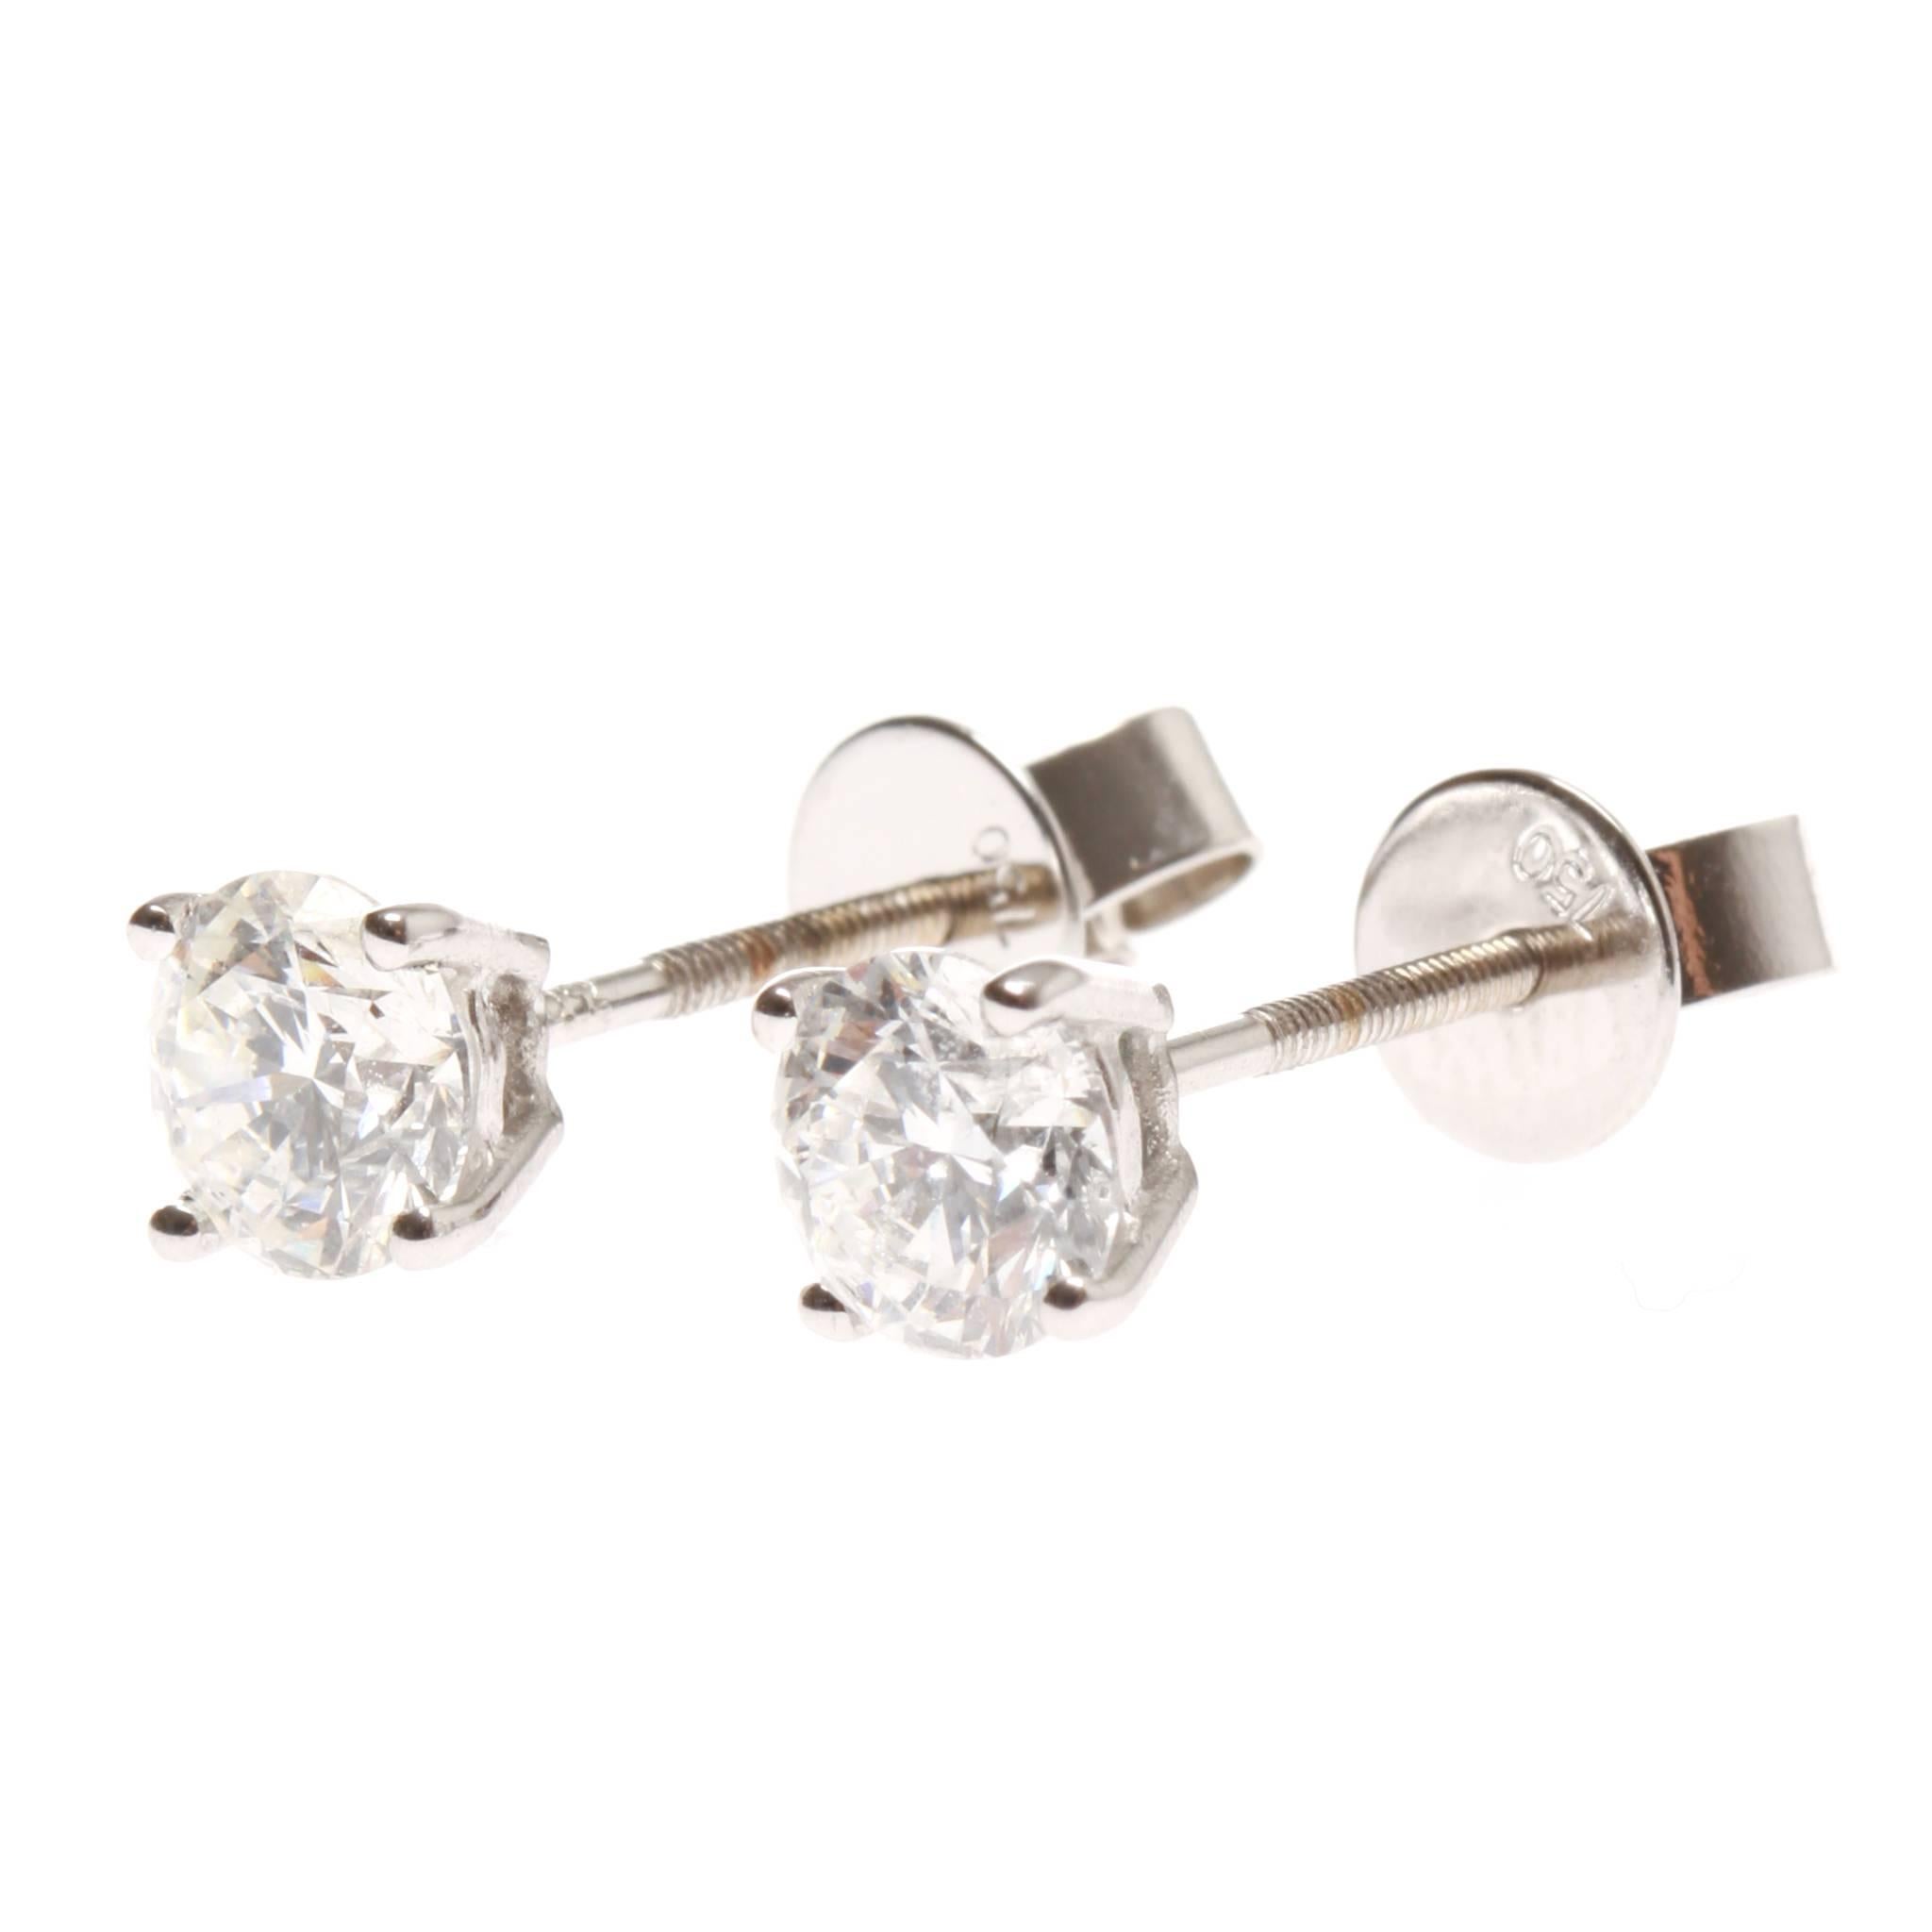 	
One pair of lady's, hand assembled, 18ct white gold diamond set earrings.
Of stud style with each earring having a single, 4 claw and single rail style, setting and each housing a single round brilliant cut diamond.
Each earring with a threaded